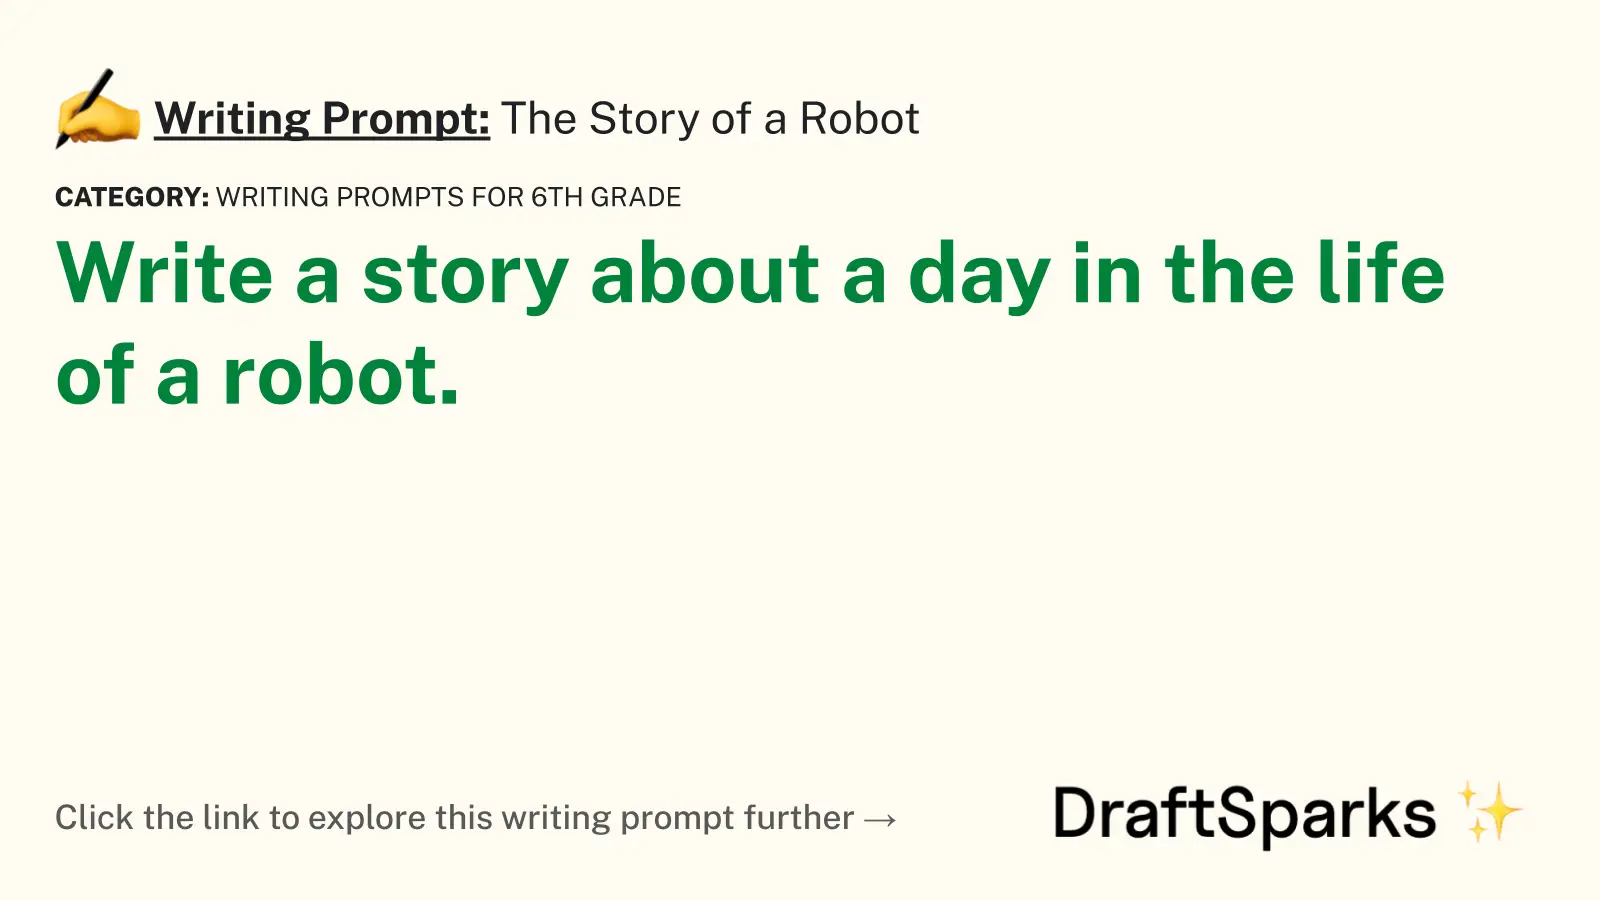 The Story of a Robot